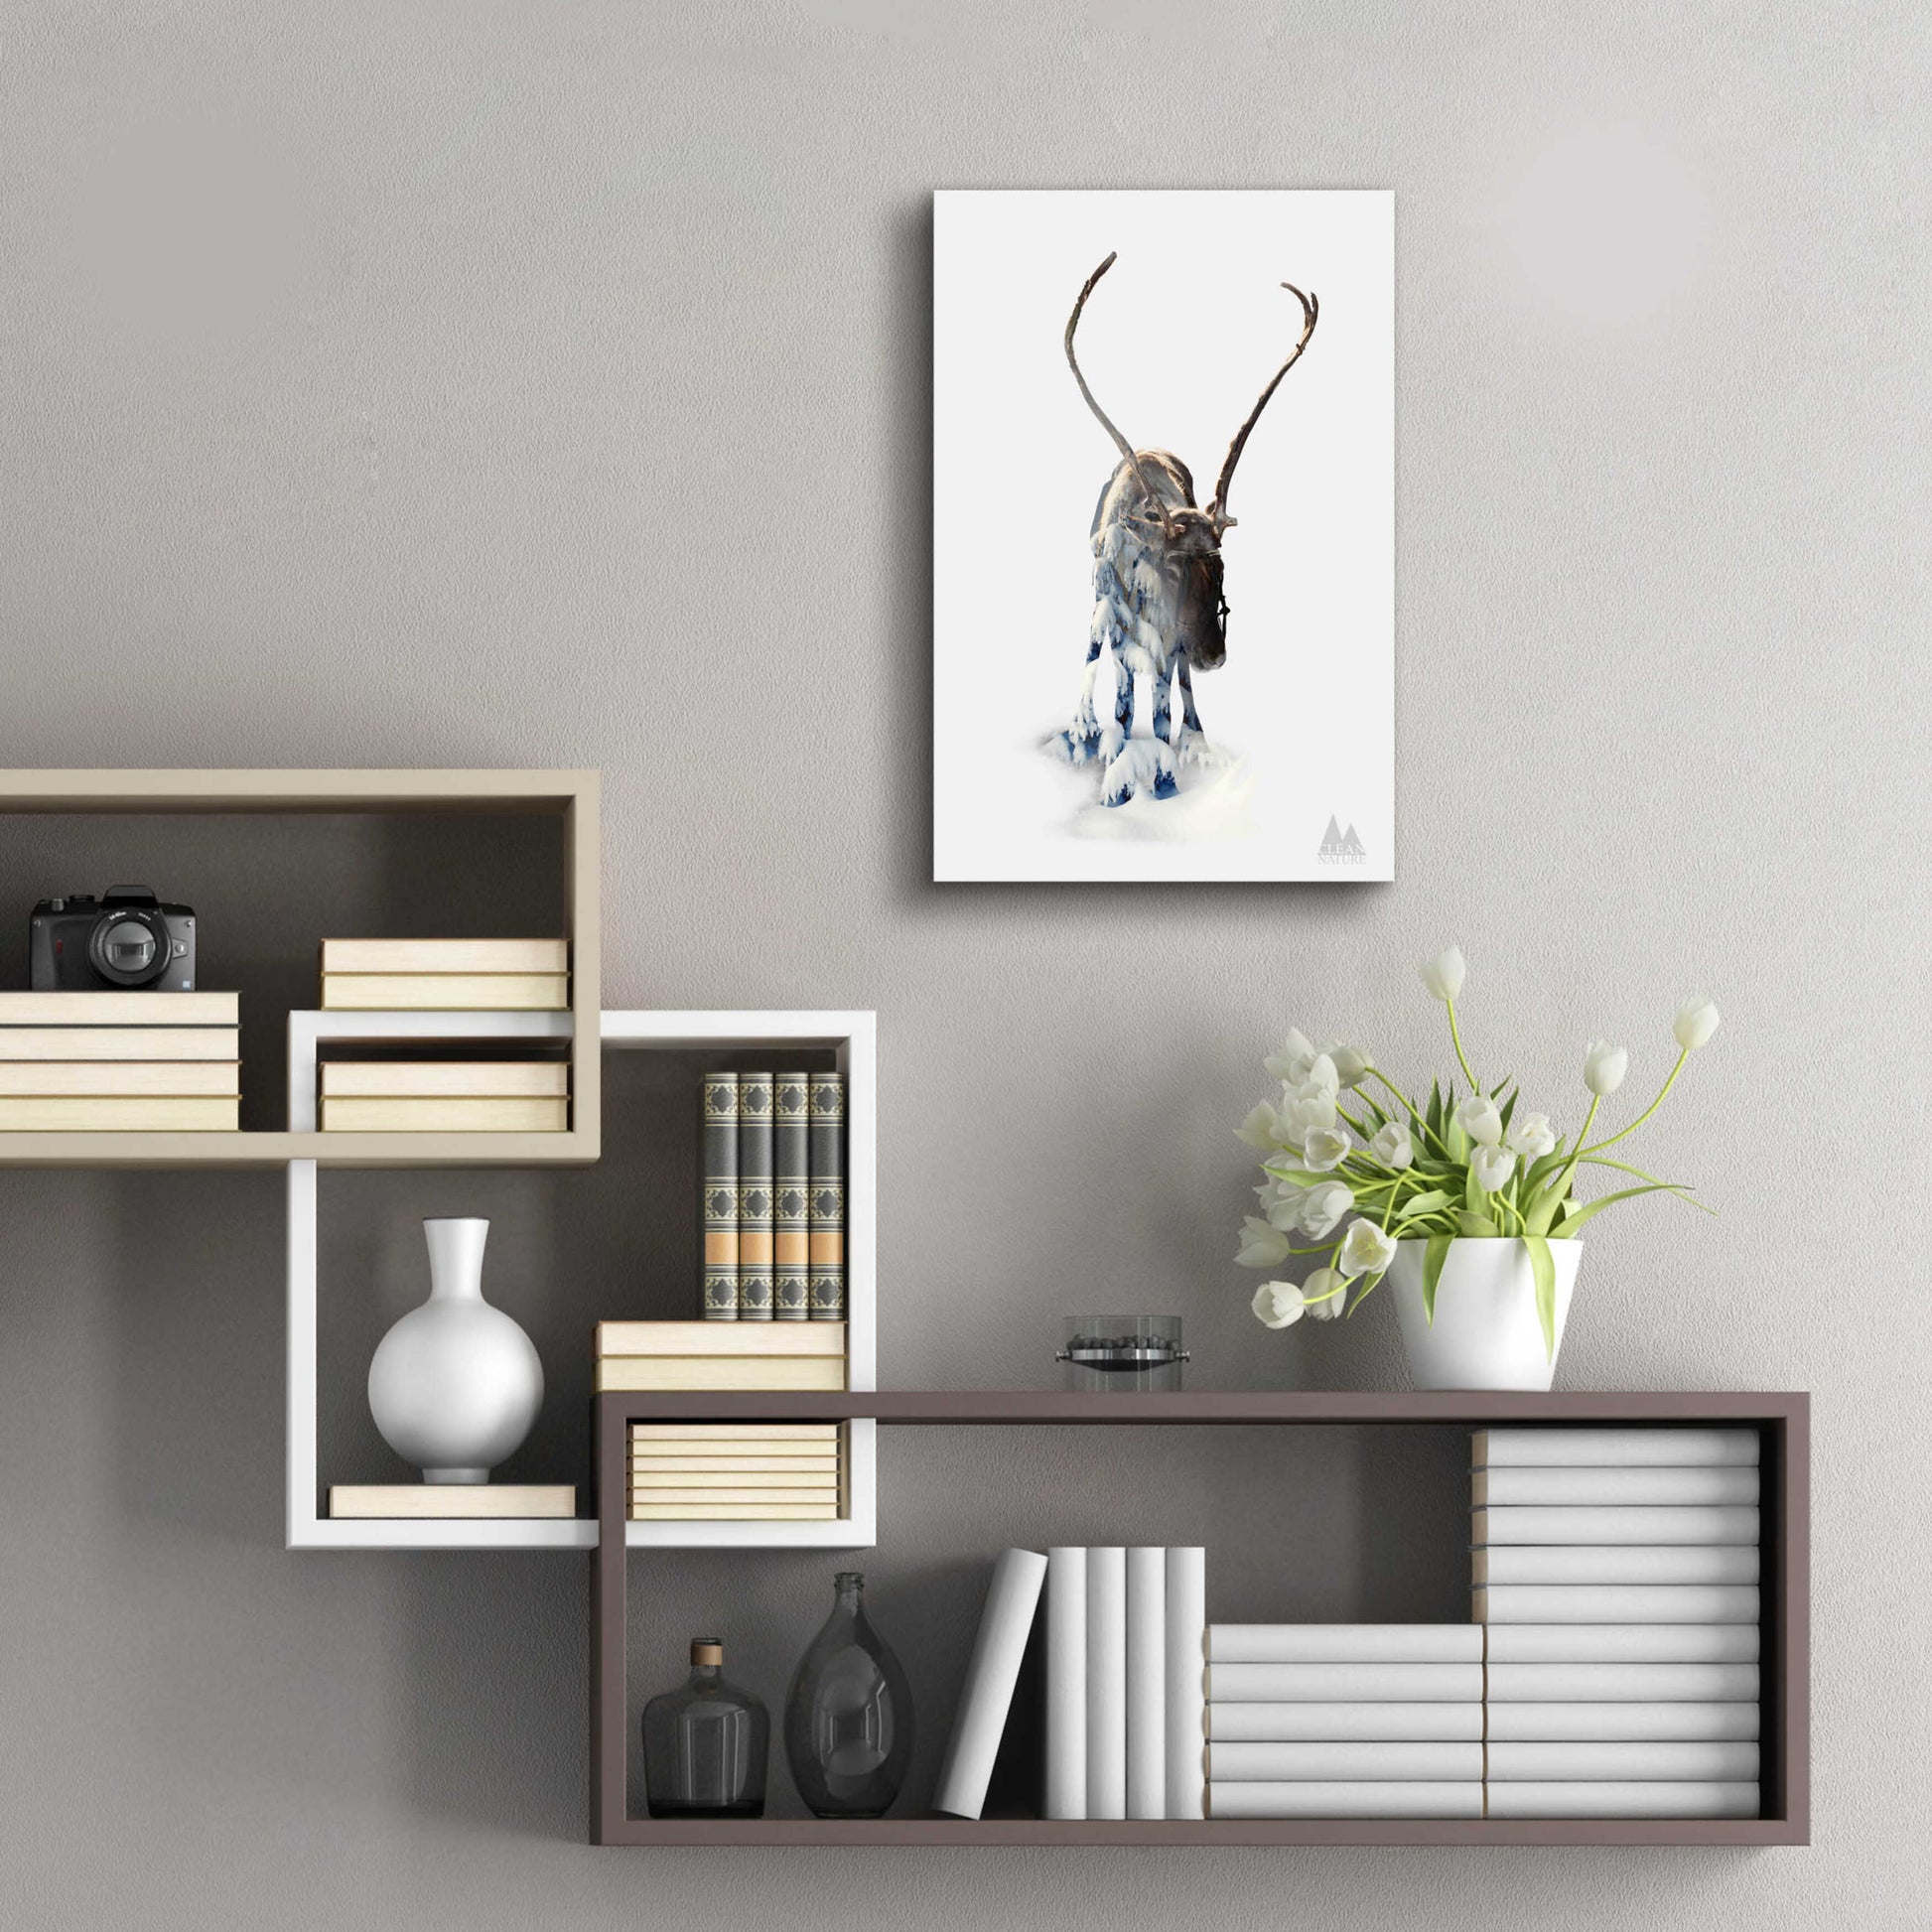 Epic Art 'Moose' by Clean Nature, Acrylic Glass Wall Art,16x24